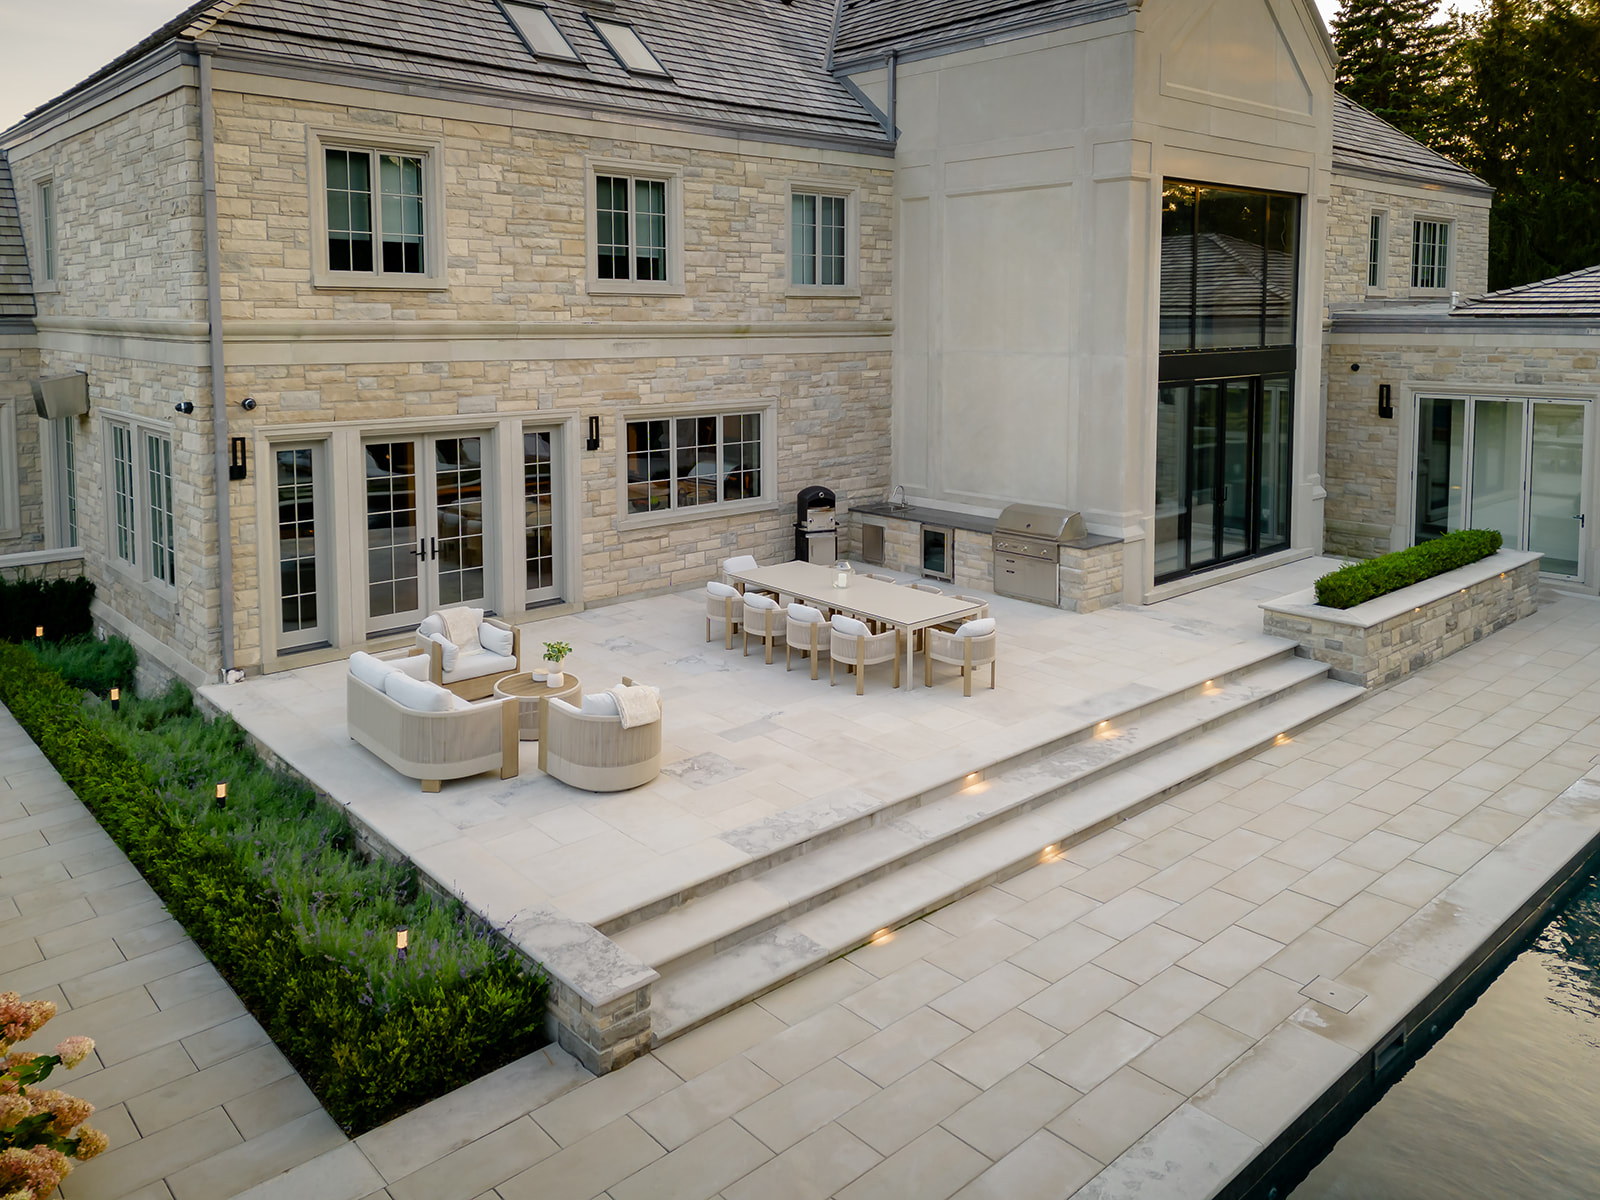 A patio with outdoor furniture on it connected to the house.